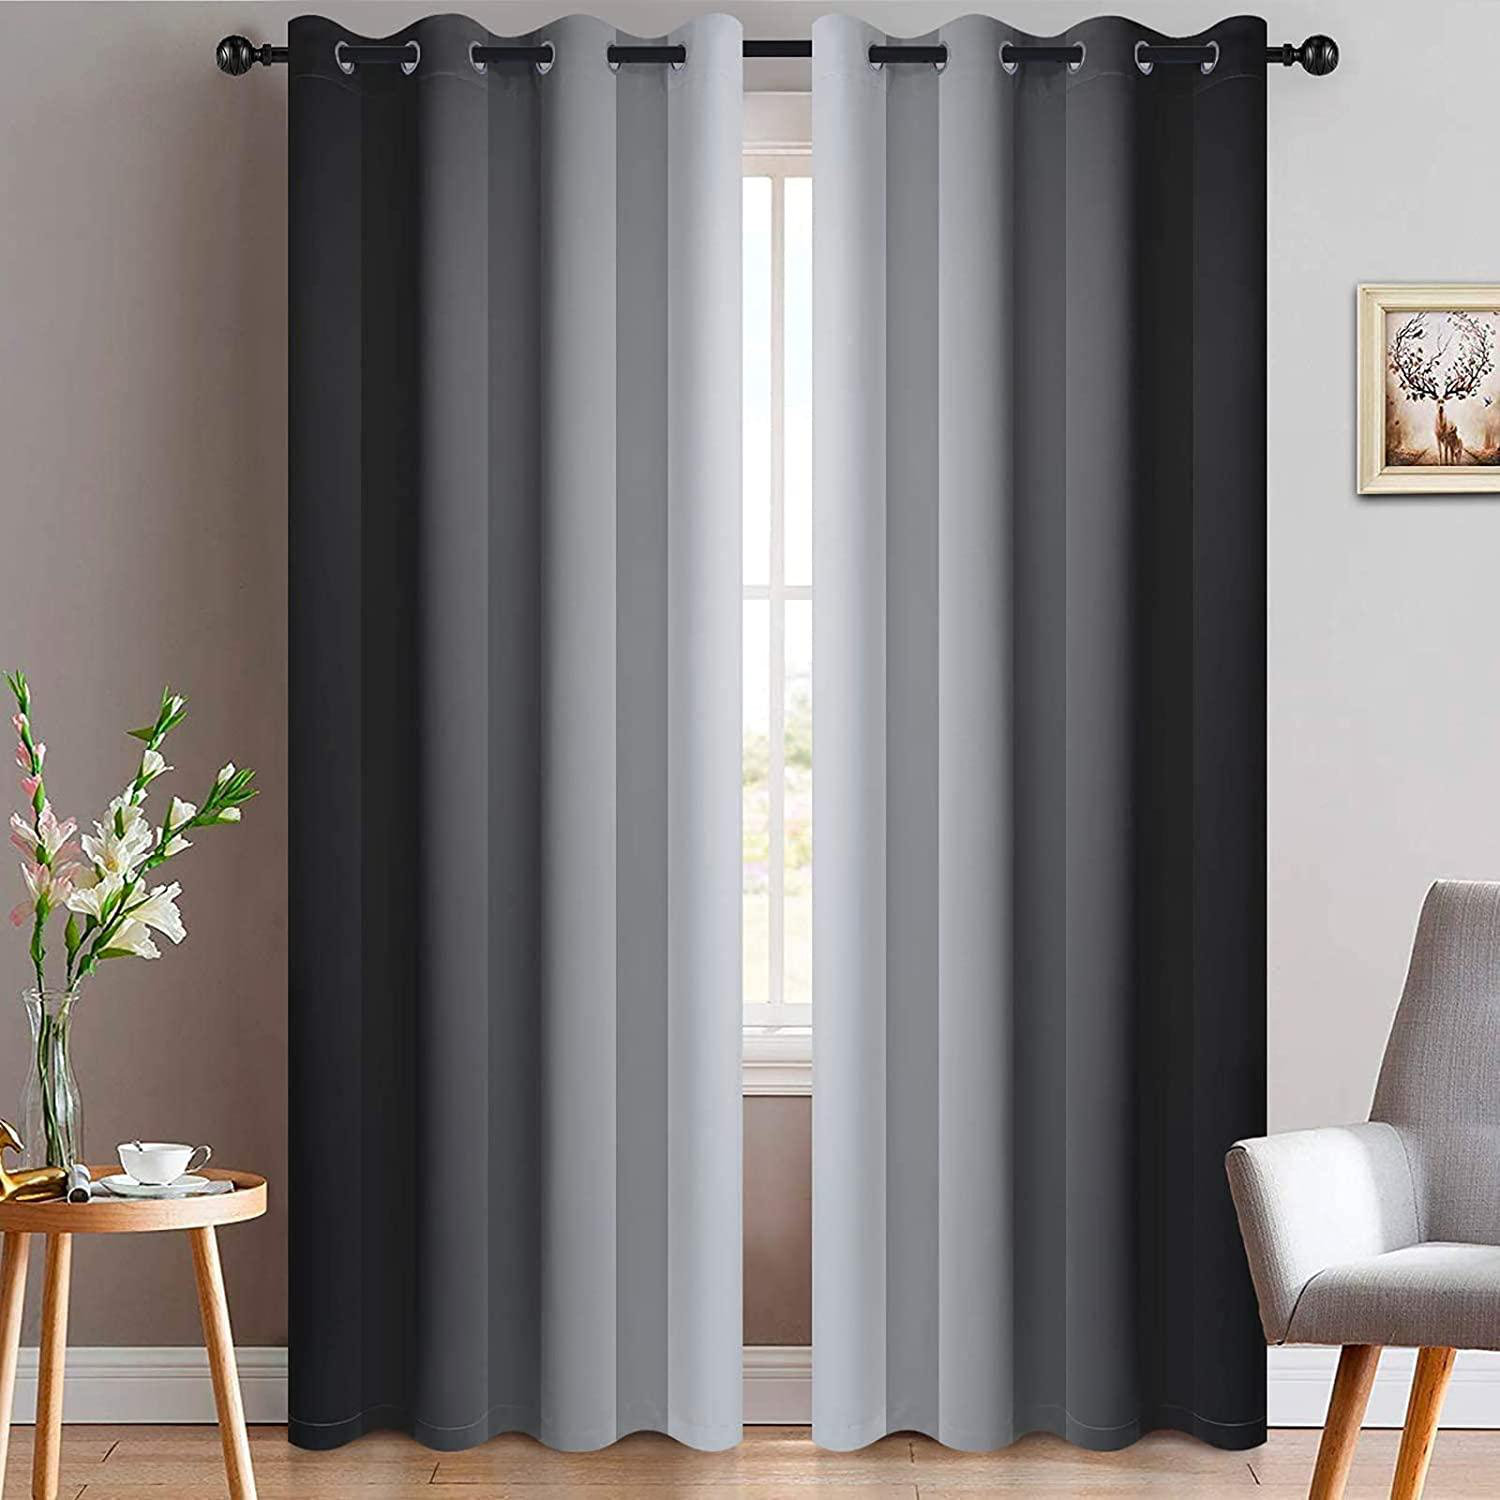 Blackout Curtains Grommet Windows Drapes Thermal Insulated Darkening for bedroom 